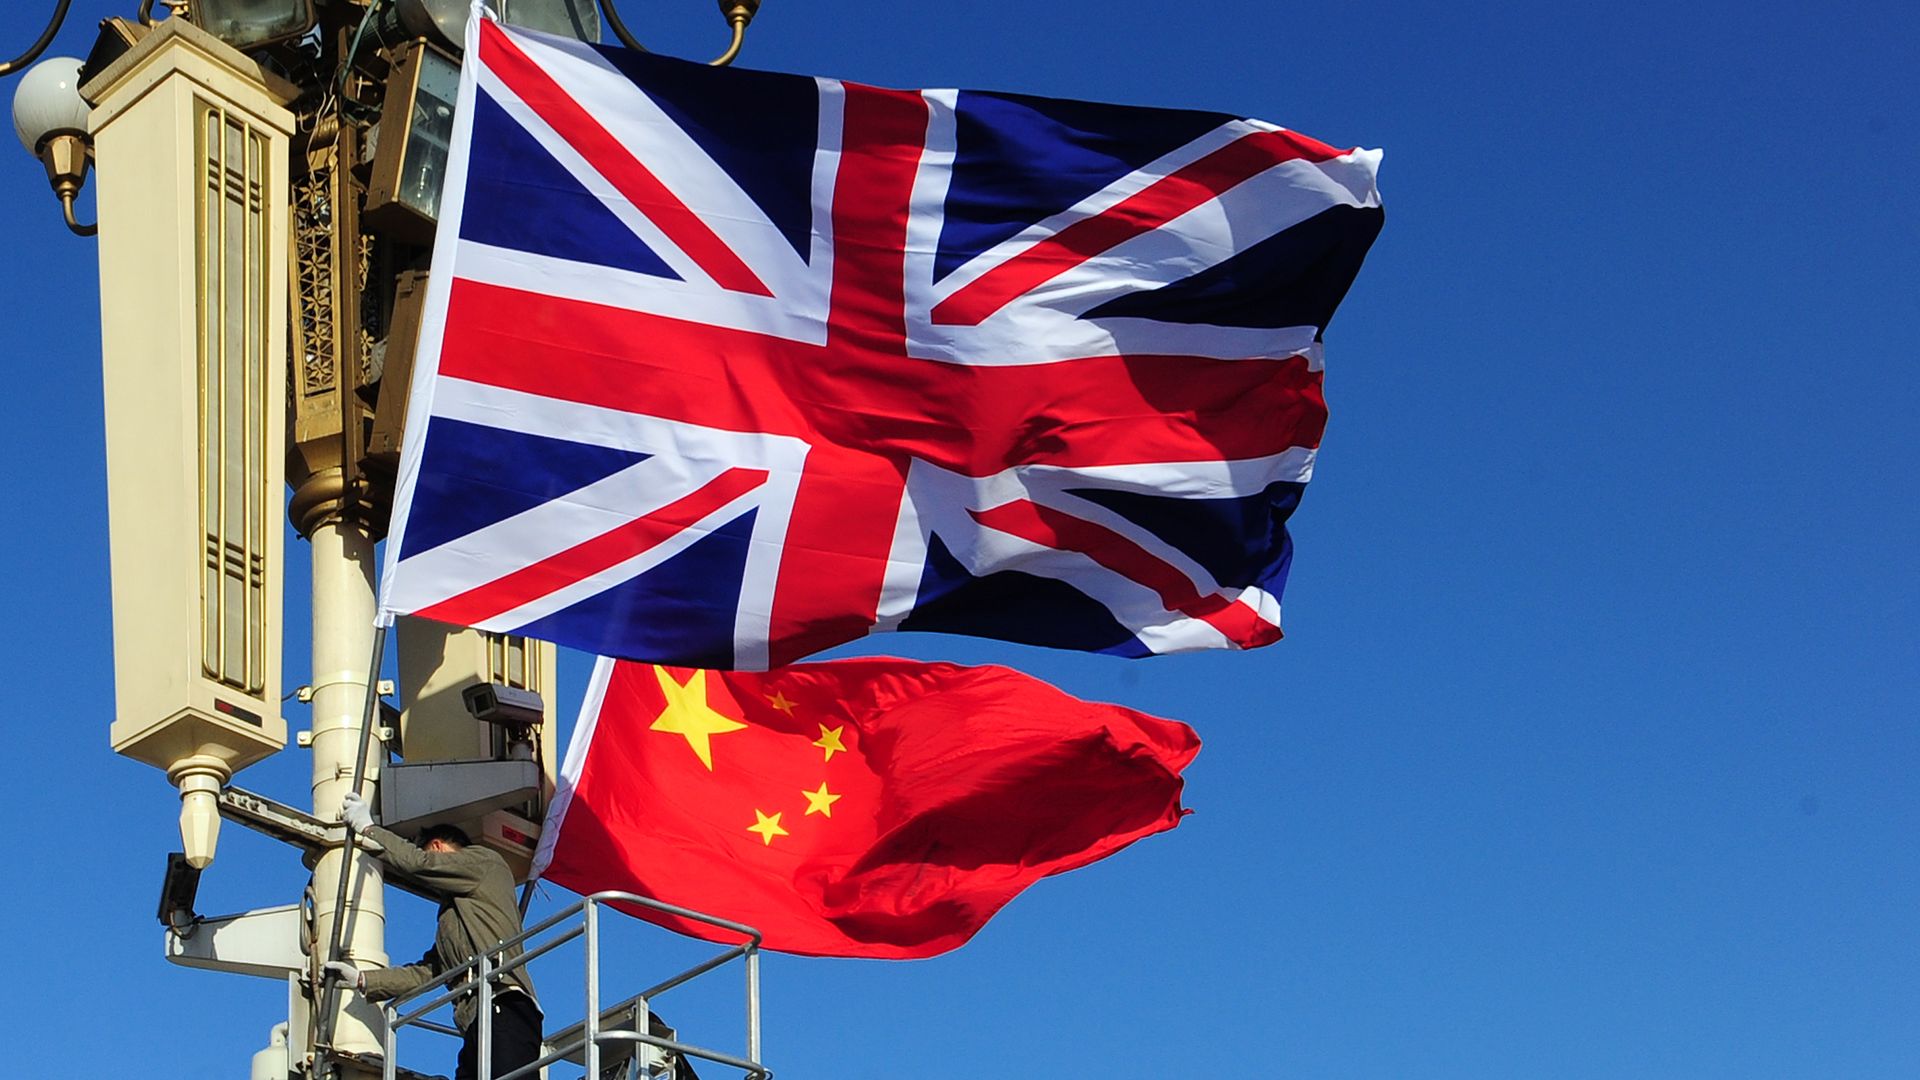 The Union Jack being hoisted next to the flag of the People's Republic of China.